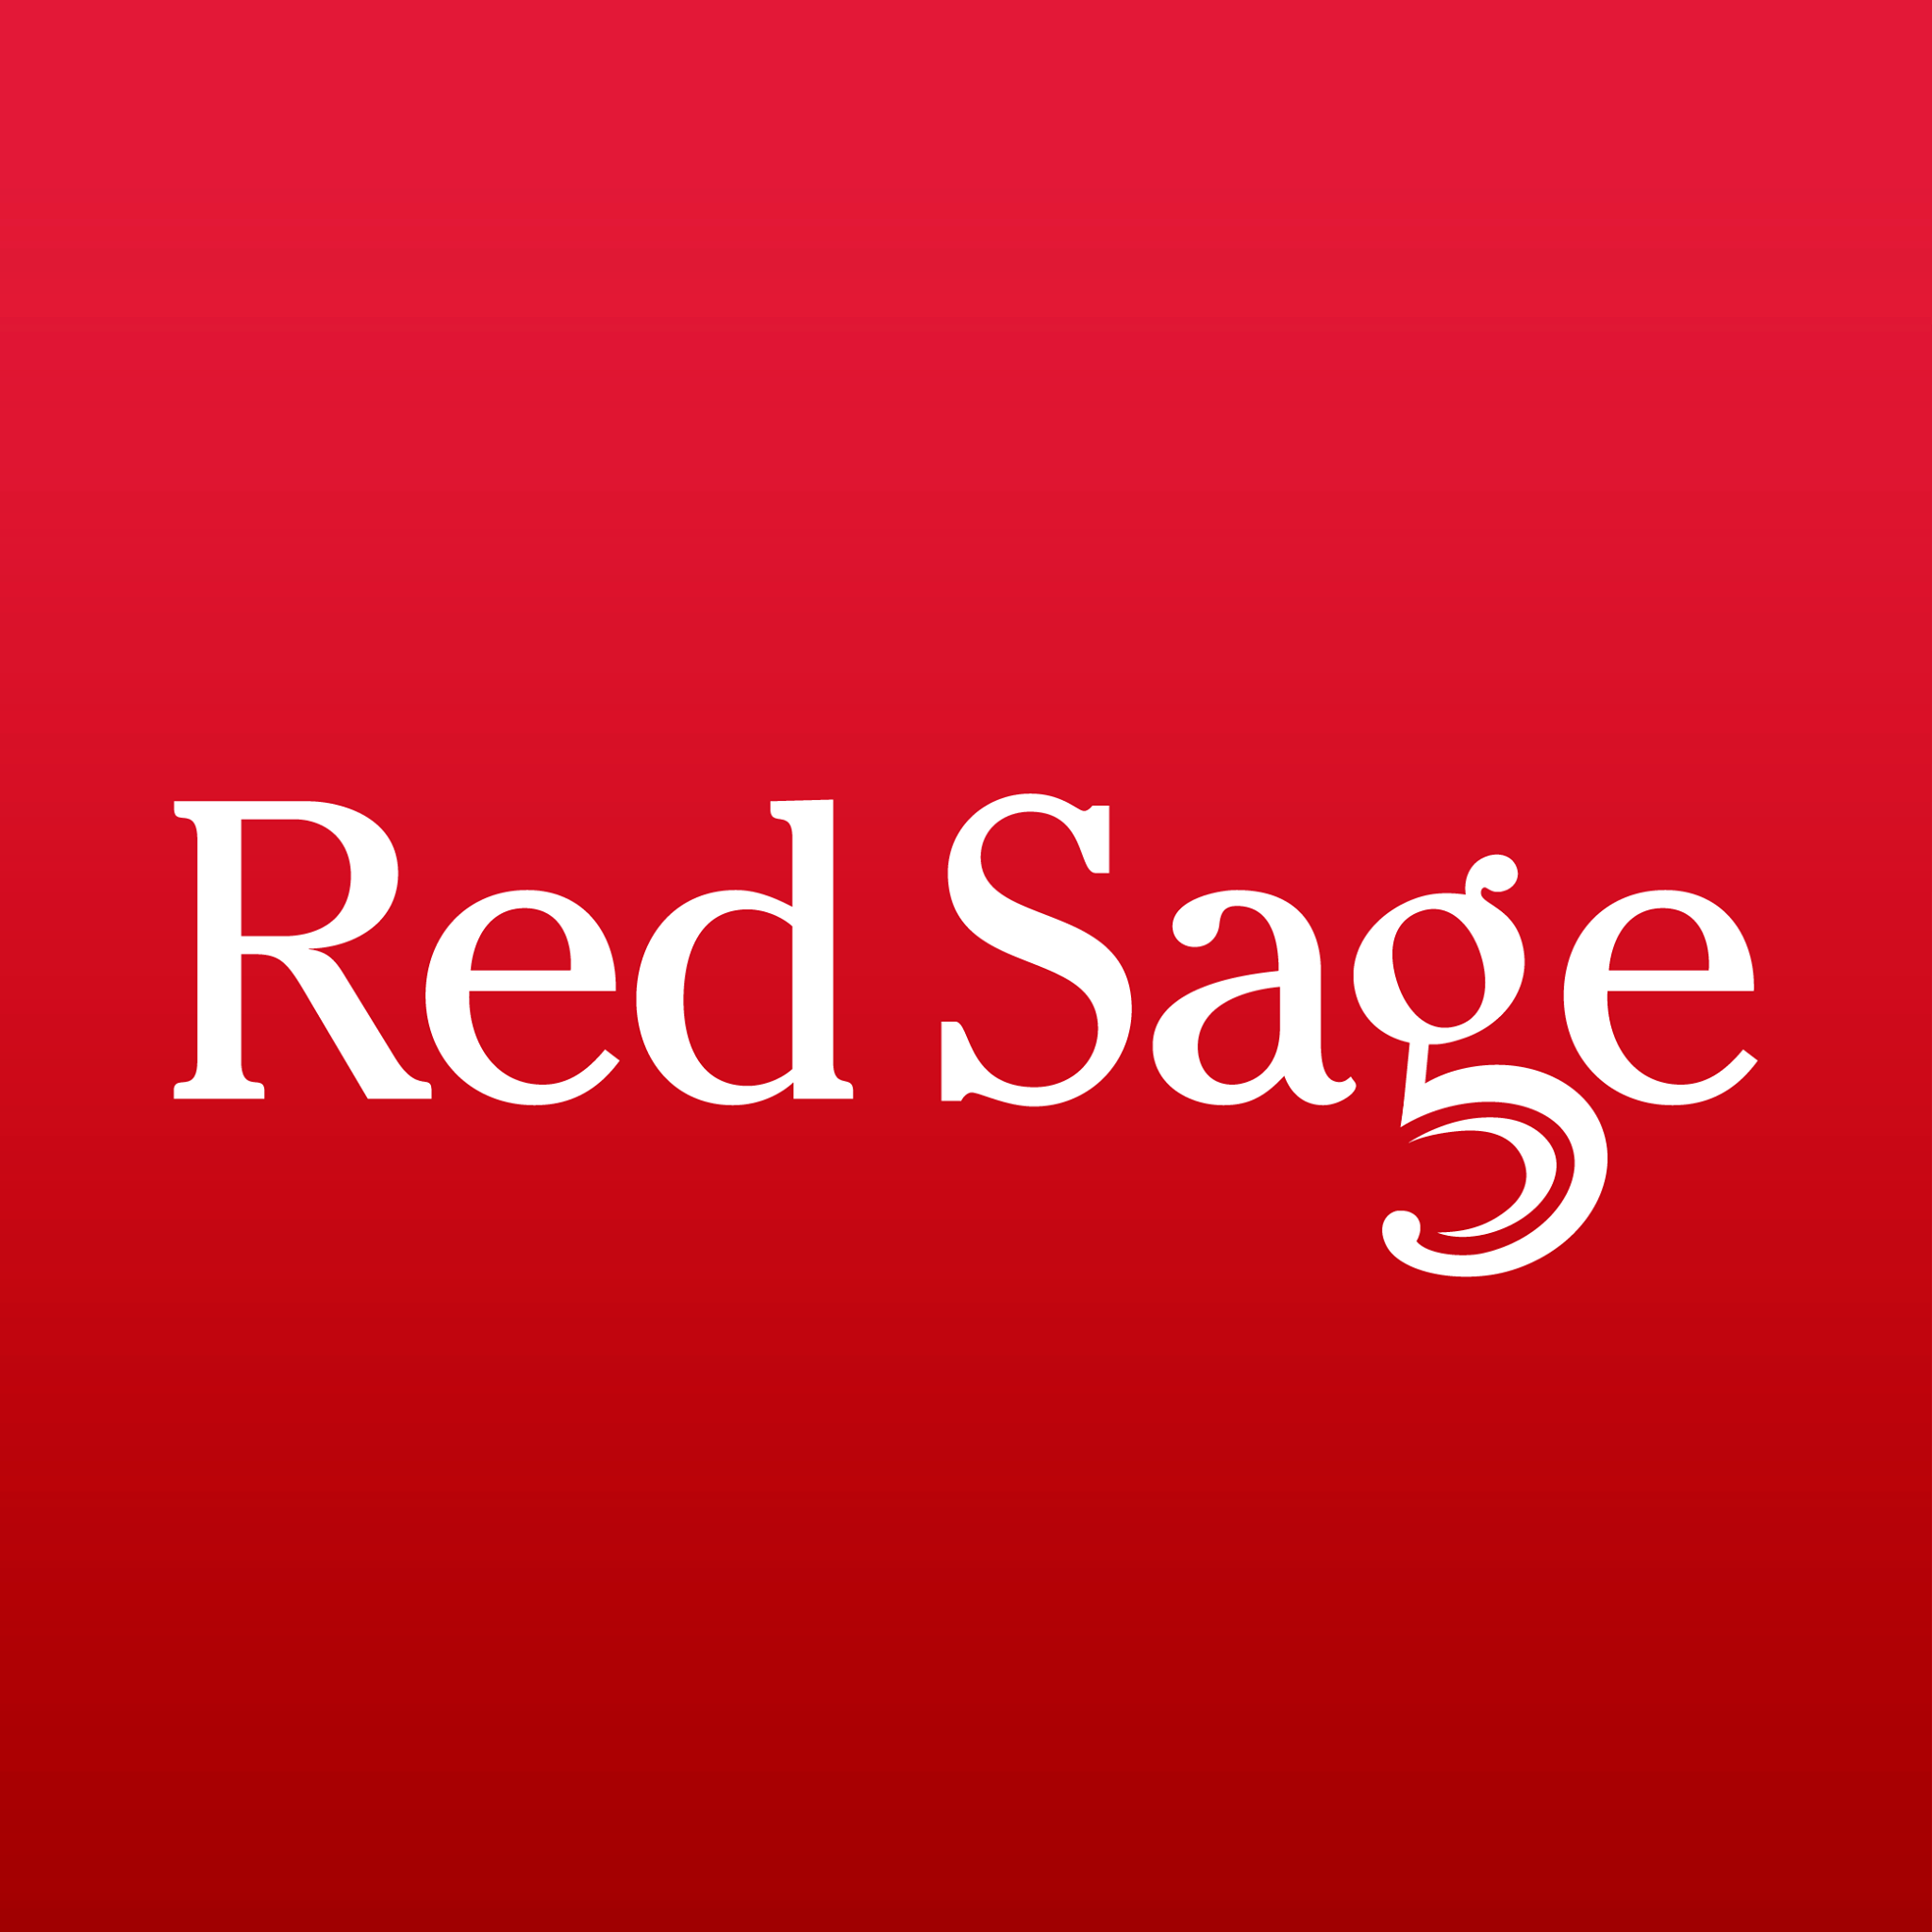 Business logo of Red Sage Communications, Inc.